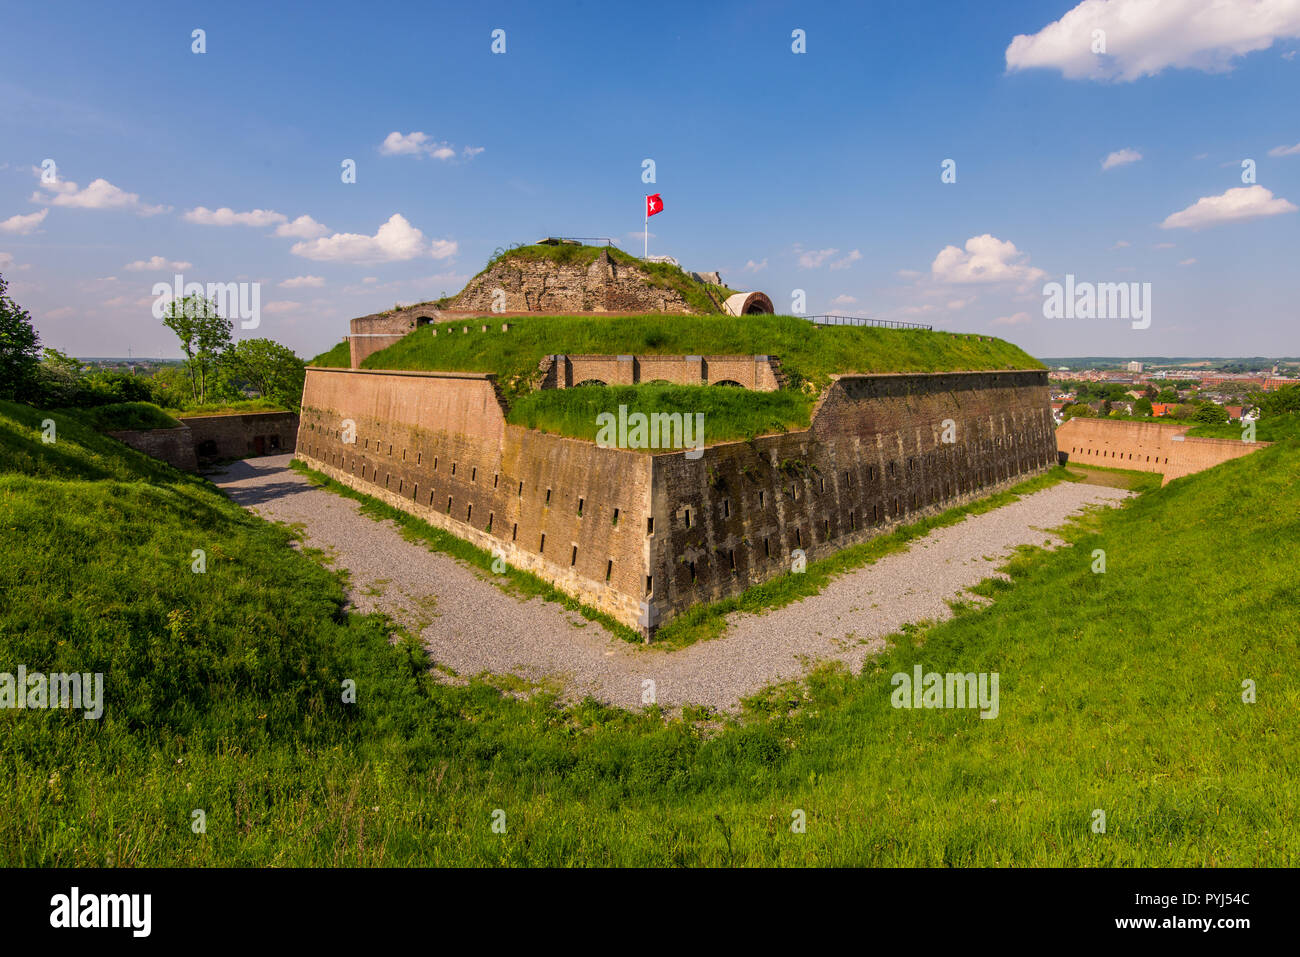 The historical fortress of Sint Pieter in Maastricht, The Netherlands Stock Photo